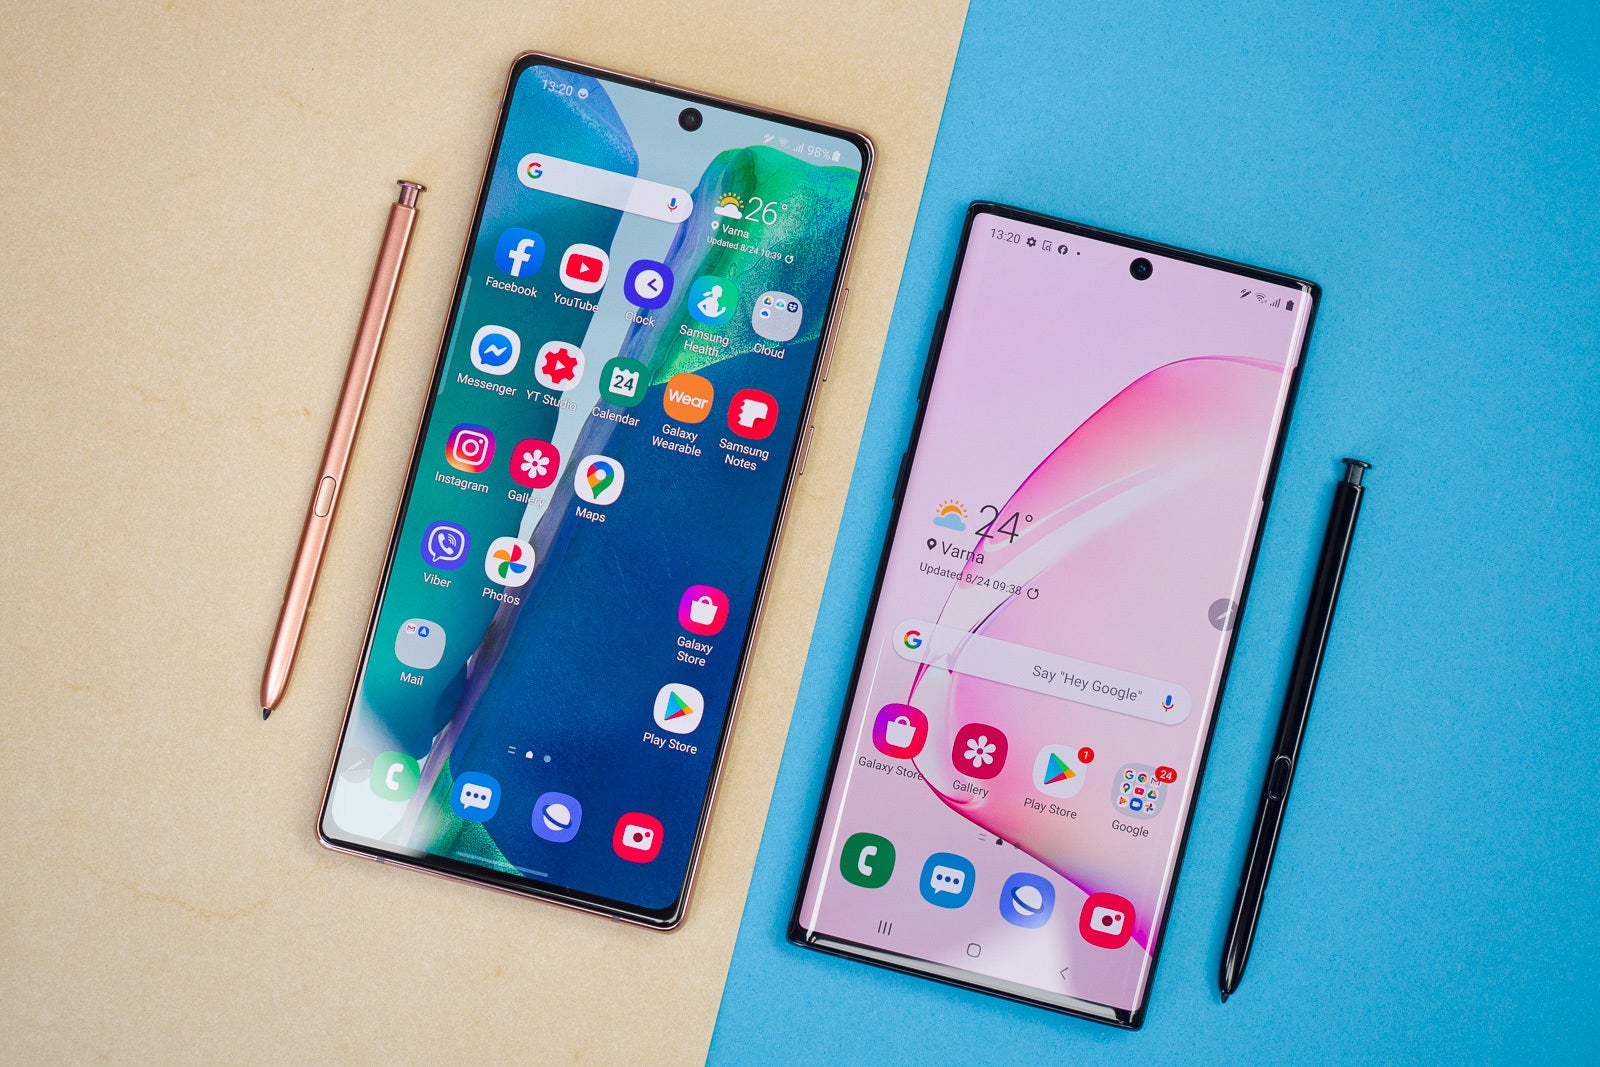 The Galaxy Note 20 and Note 10 look like the real predecessors of the S22 Ultra - iPhone 13, Galaxy S22 Ultra, and Pixel 6: new designs or blasts from the past?